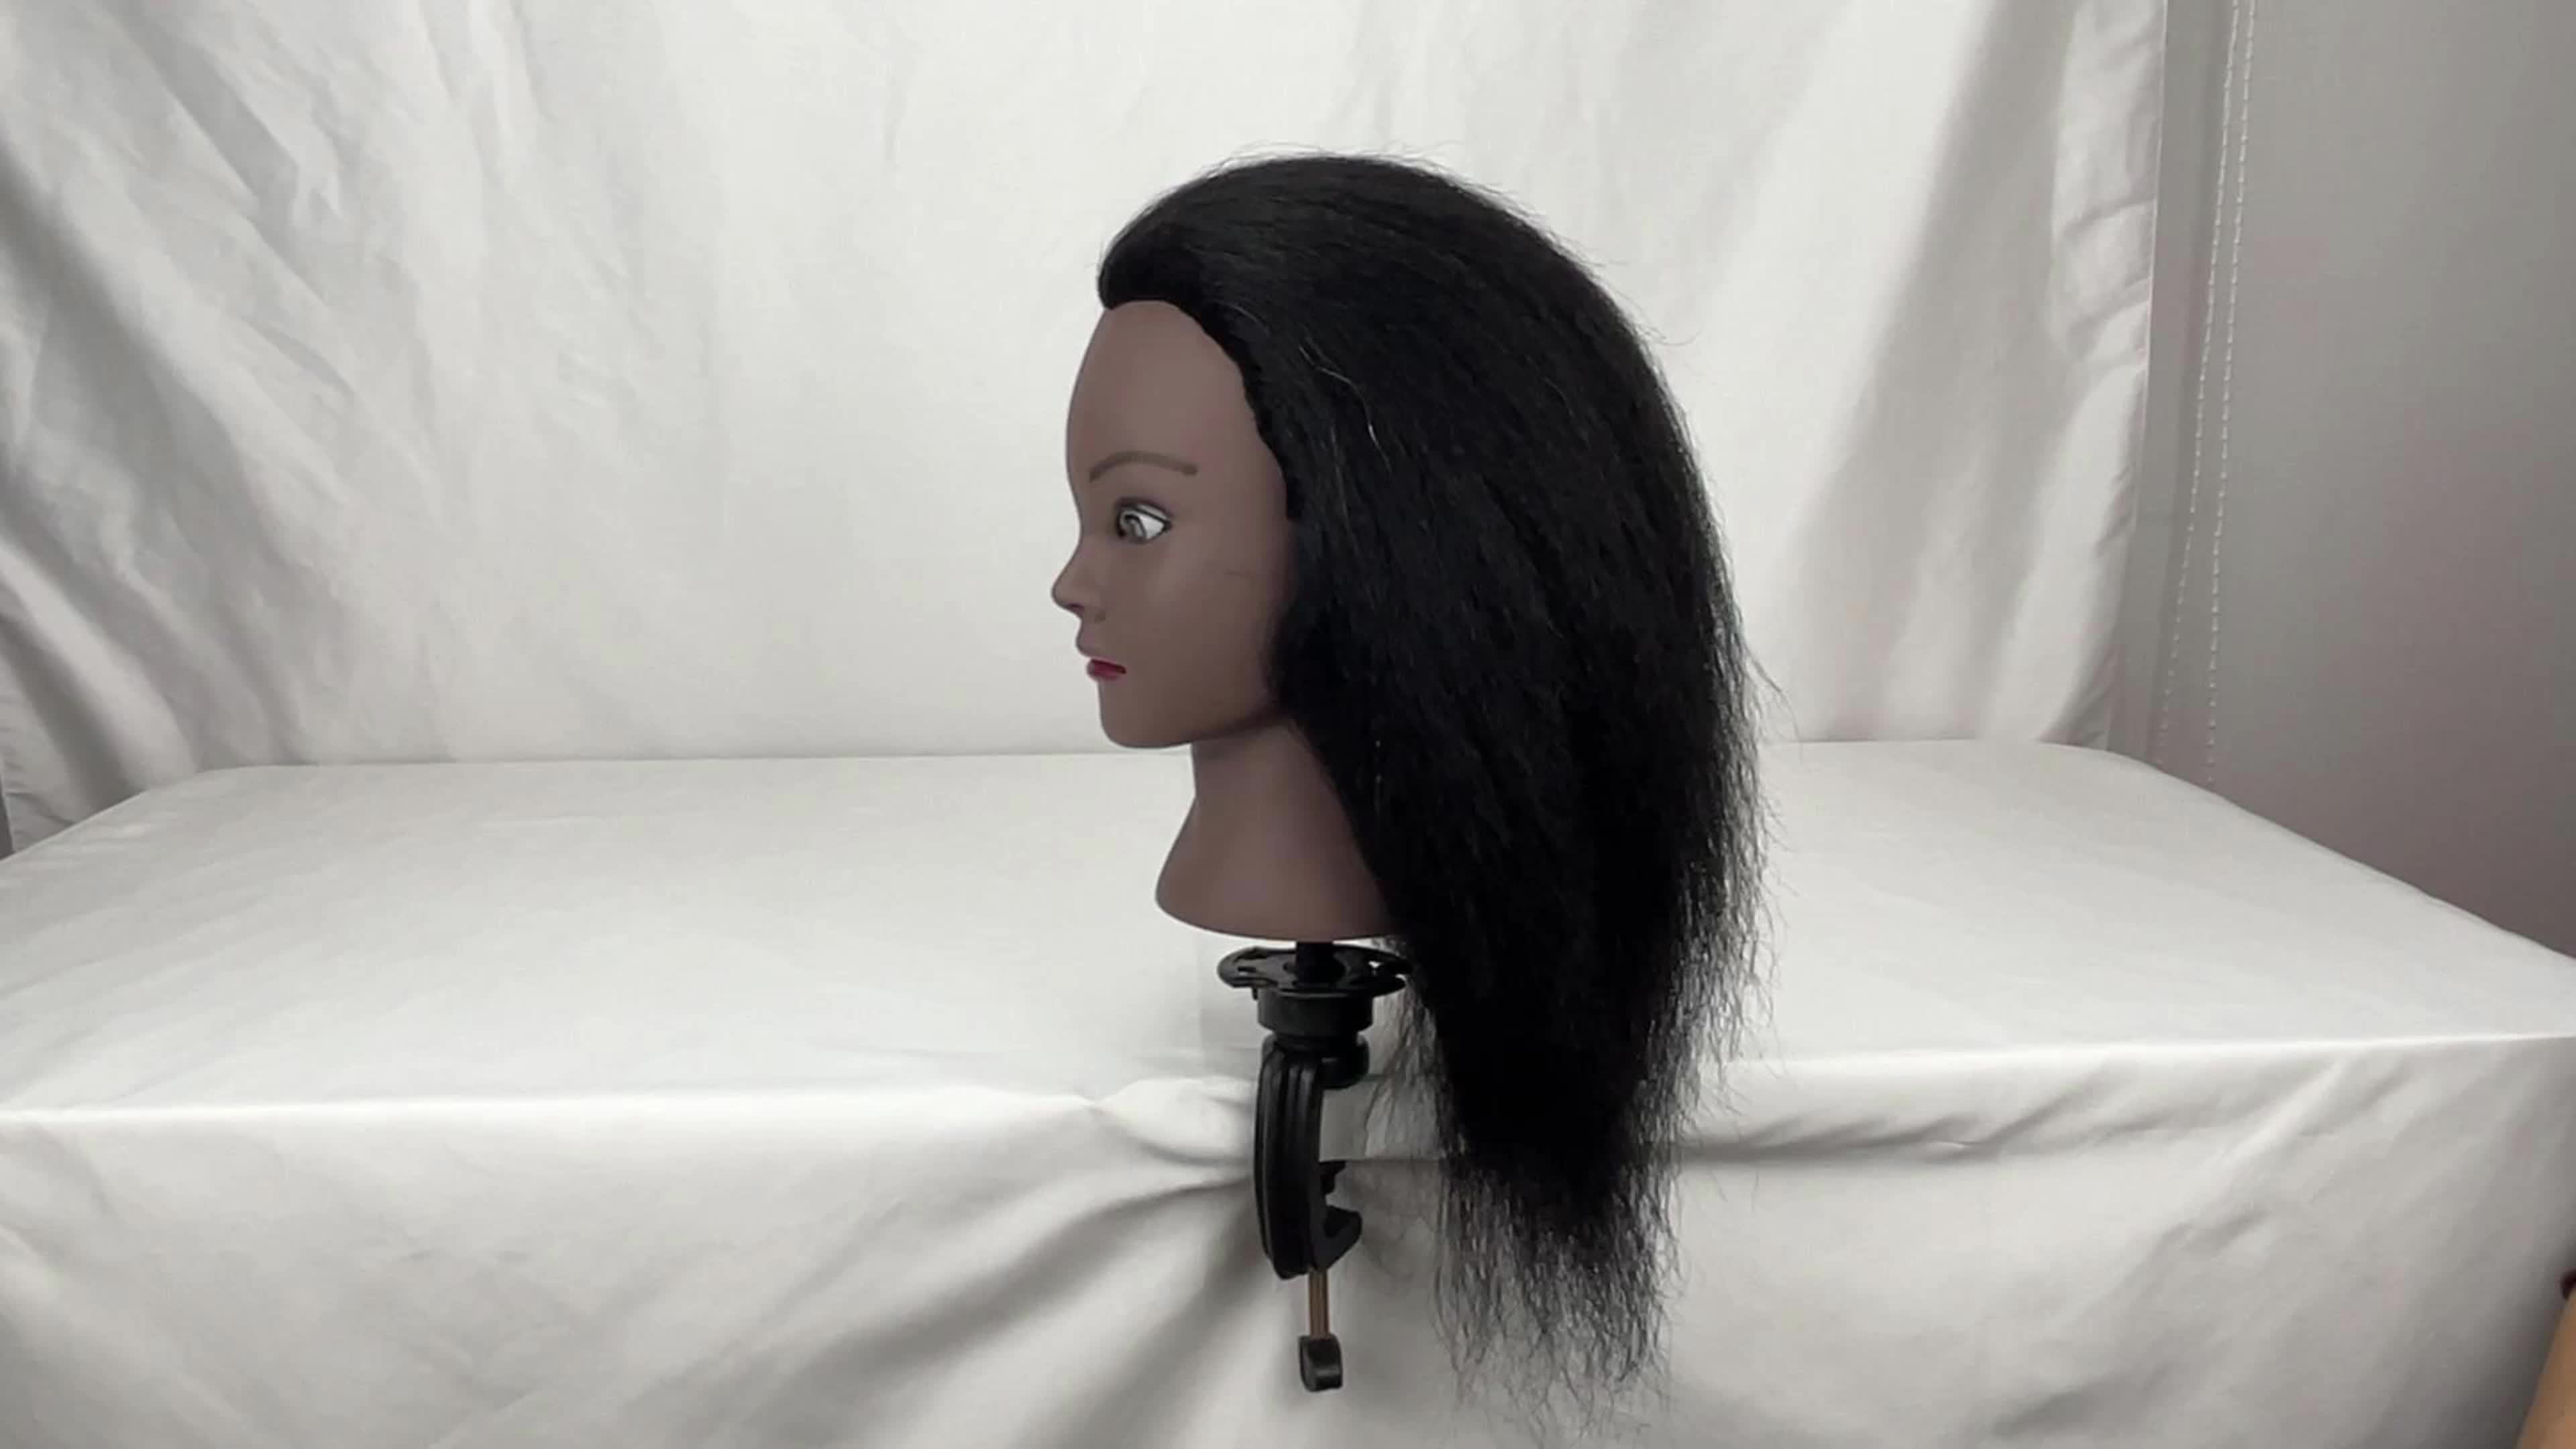 African Mannequin Head With Real Hair Afro Heads Professional Styling  Braiding Training Hairart Barber Hairdressing Professional hair clips and